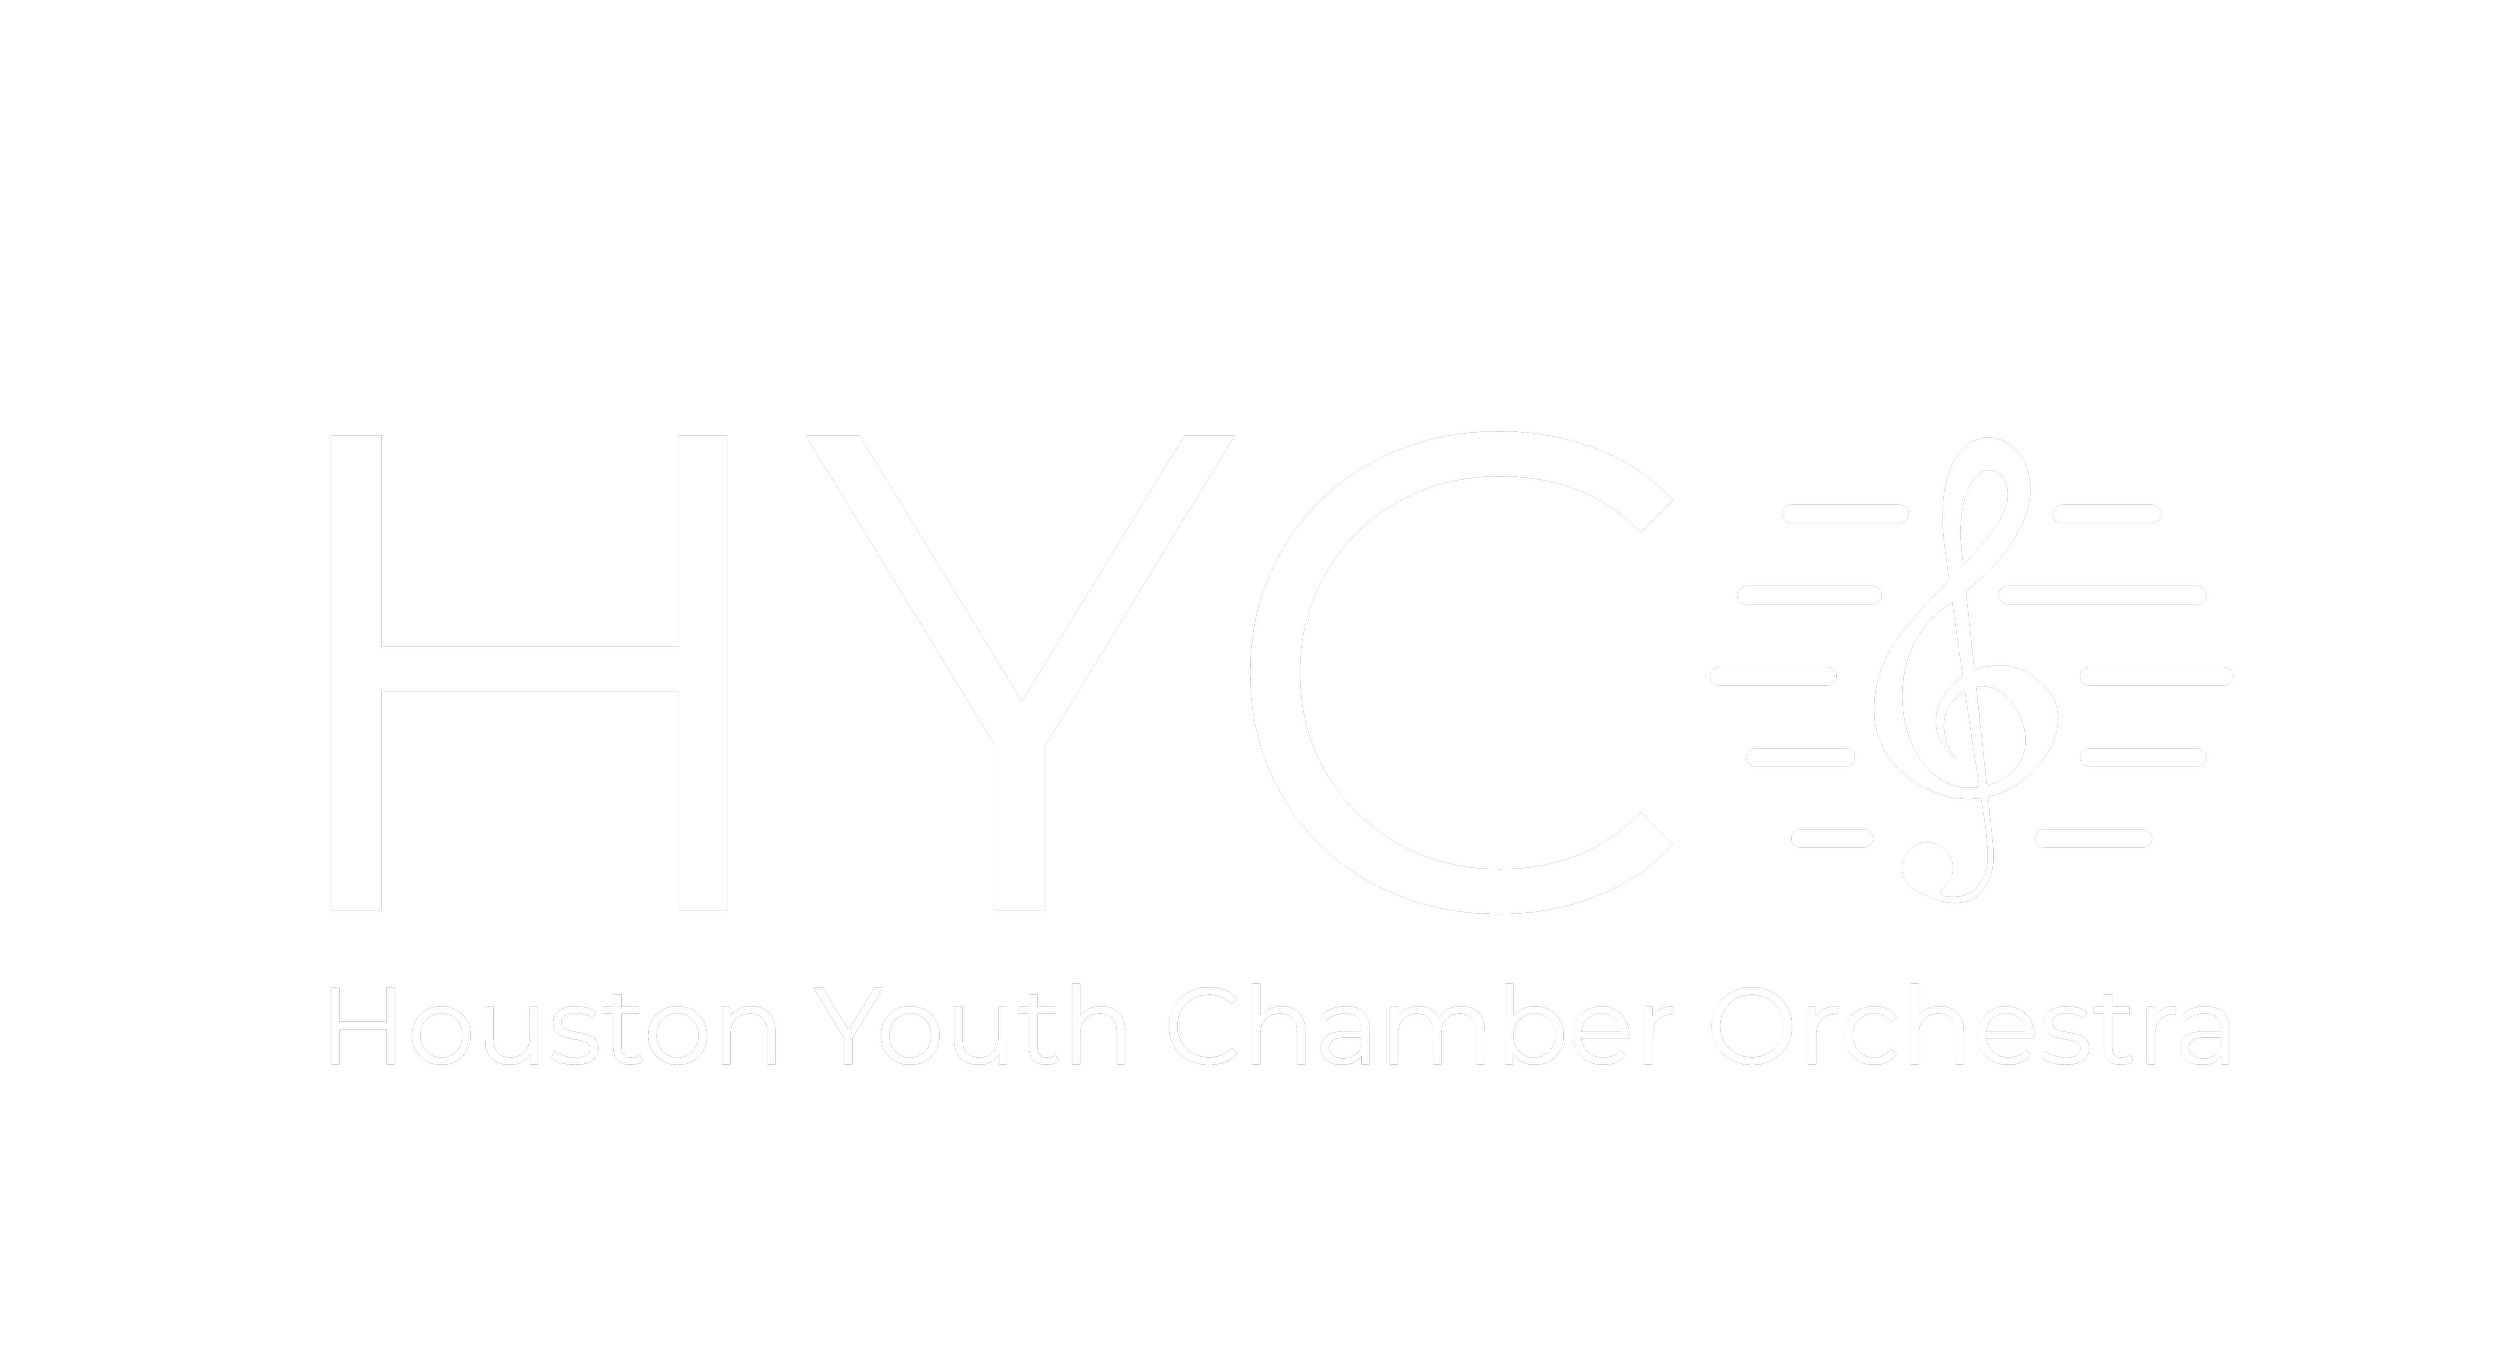 Houston Youth Chamber Orchestra